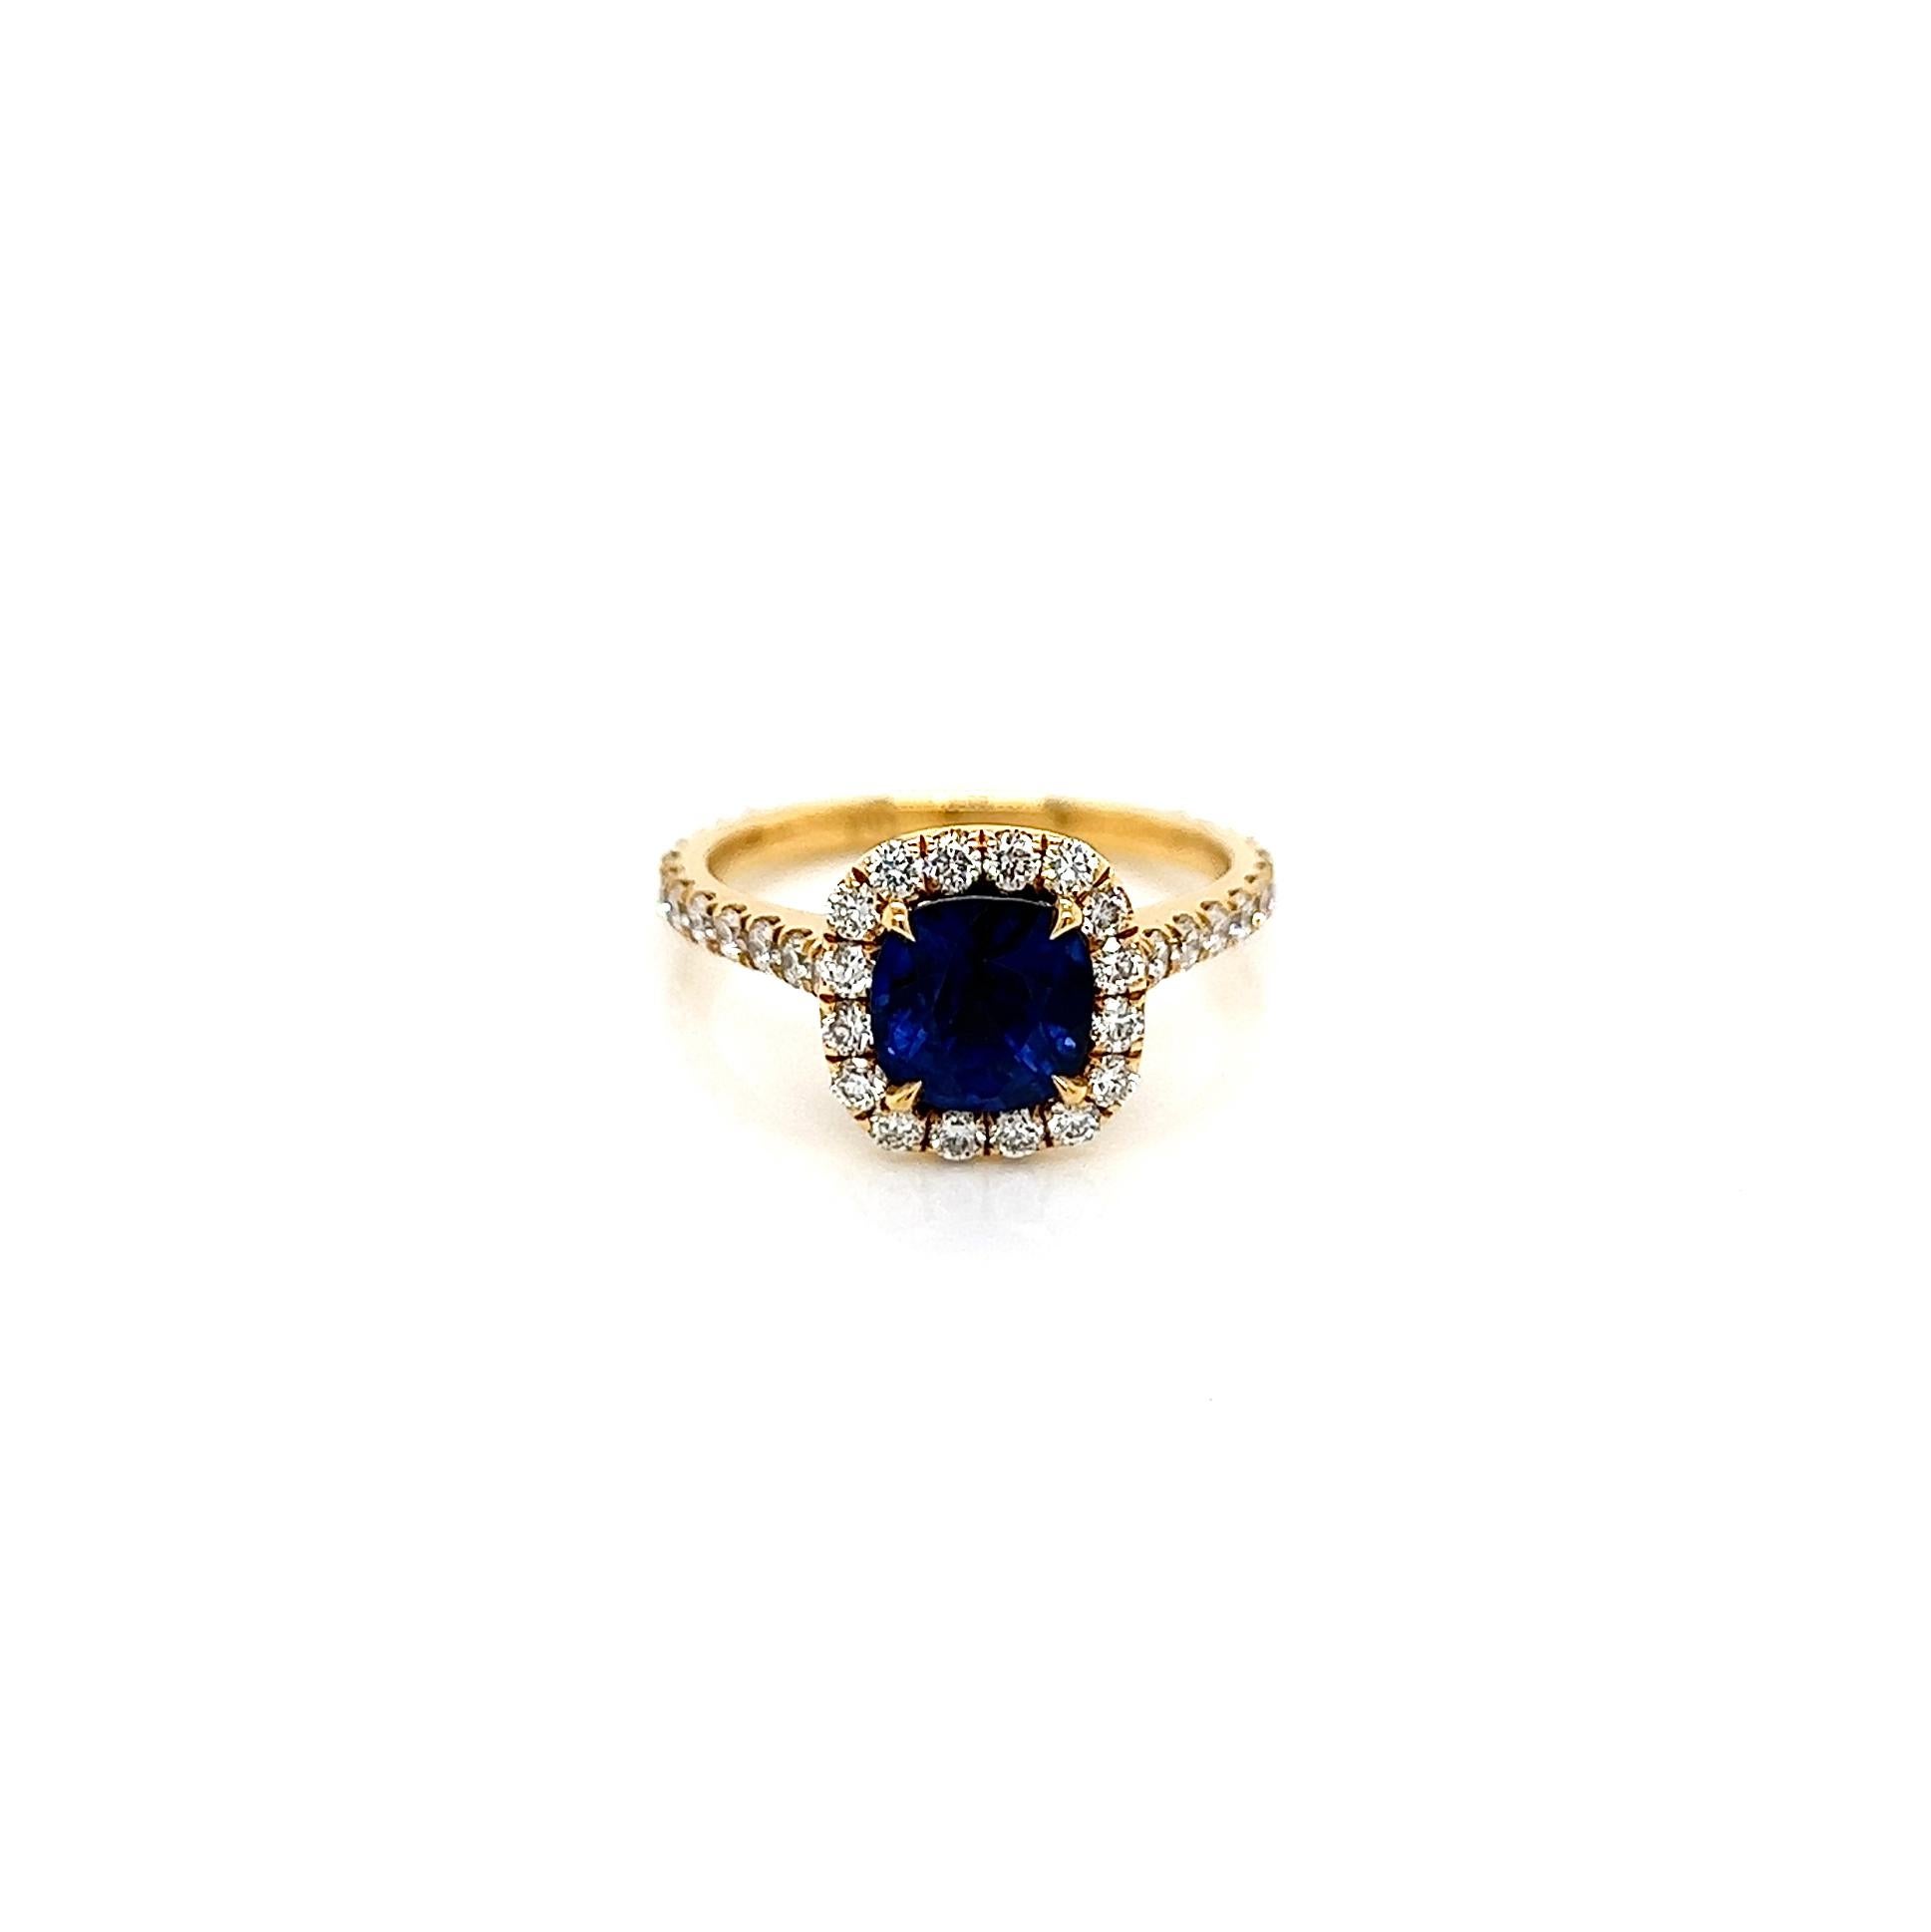 2.18 Total Carat Sapphire Diamond Engagement Ring
This style is truly timeless and always elegant. This style features a delicate halo that perfectly compliments the center stone and our signature handset pavé.

-Metal Type: 18K Yellow Gold
-1.38